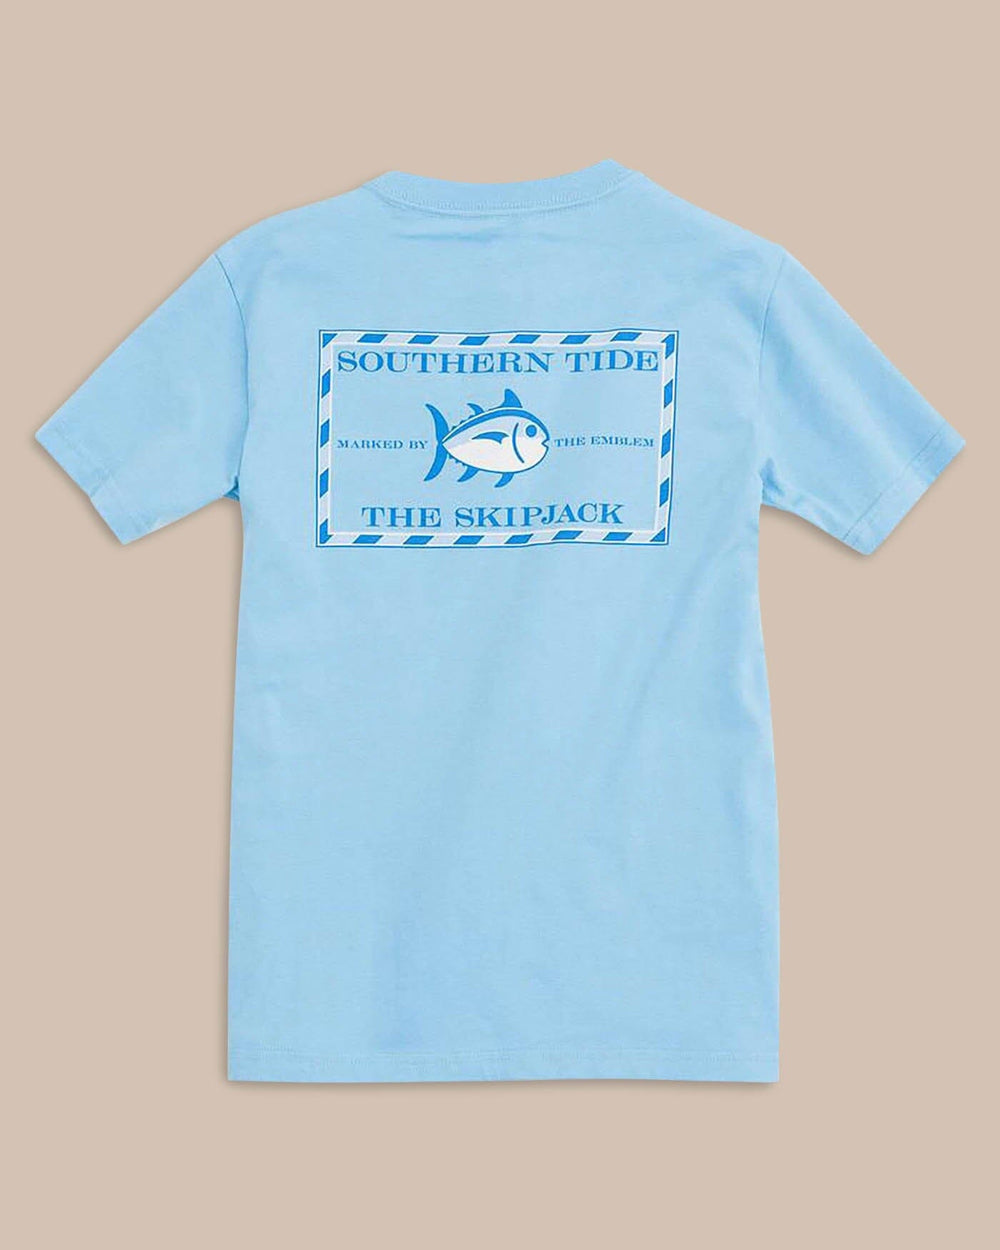 The back view of the Kid's Blue Original Skipjack T-Shirt by Southern Tide - Ocean Channel